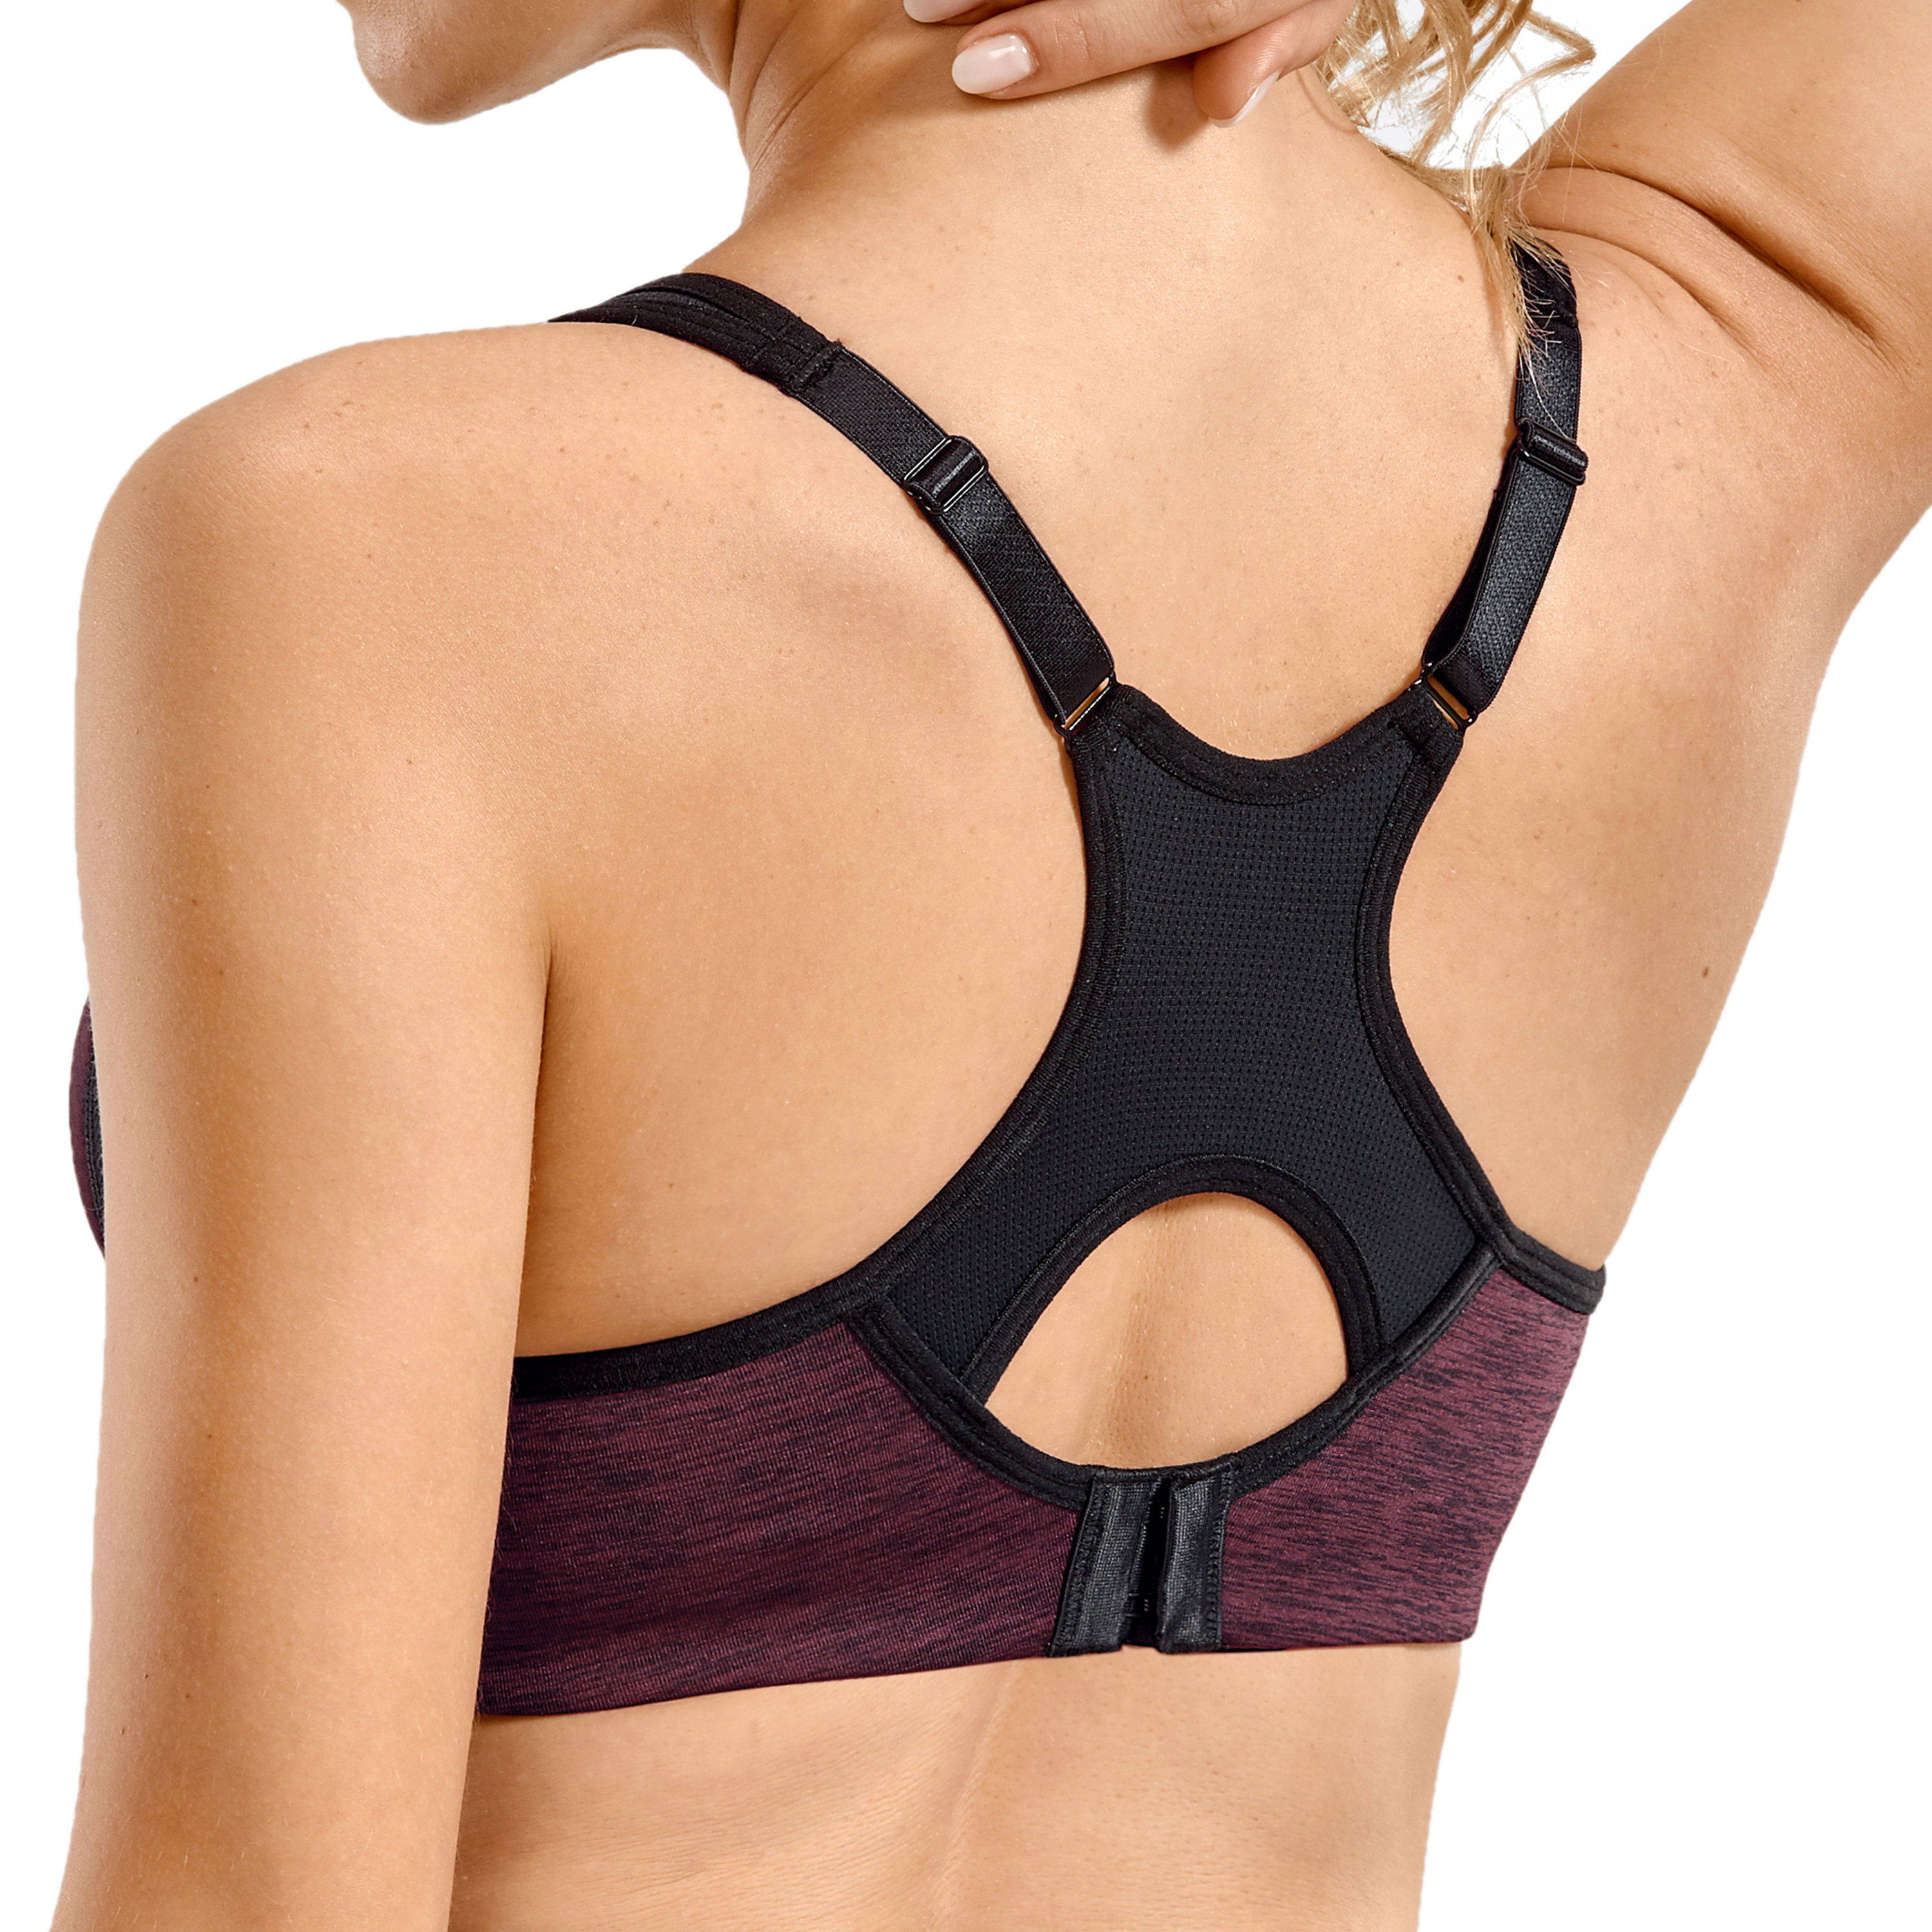 thumbnail 2 - SYROKAN Women&#039;s Underwire Sports Bra Support High Impact Racerback Lightly Lined